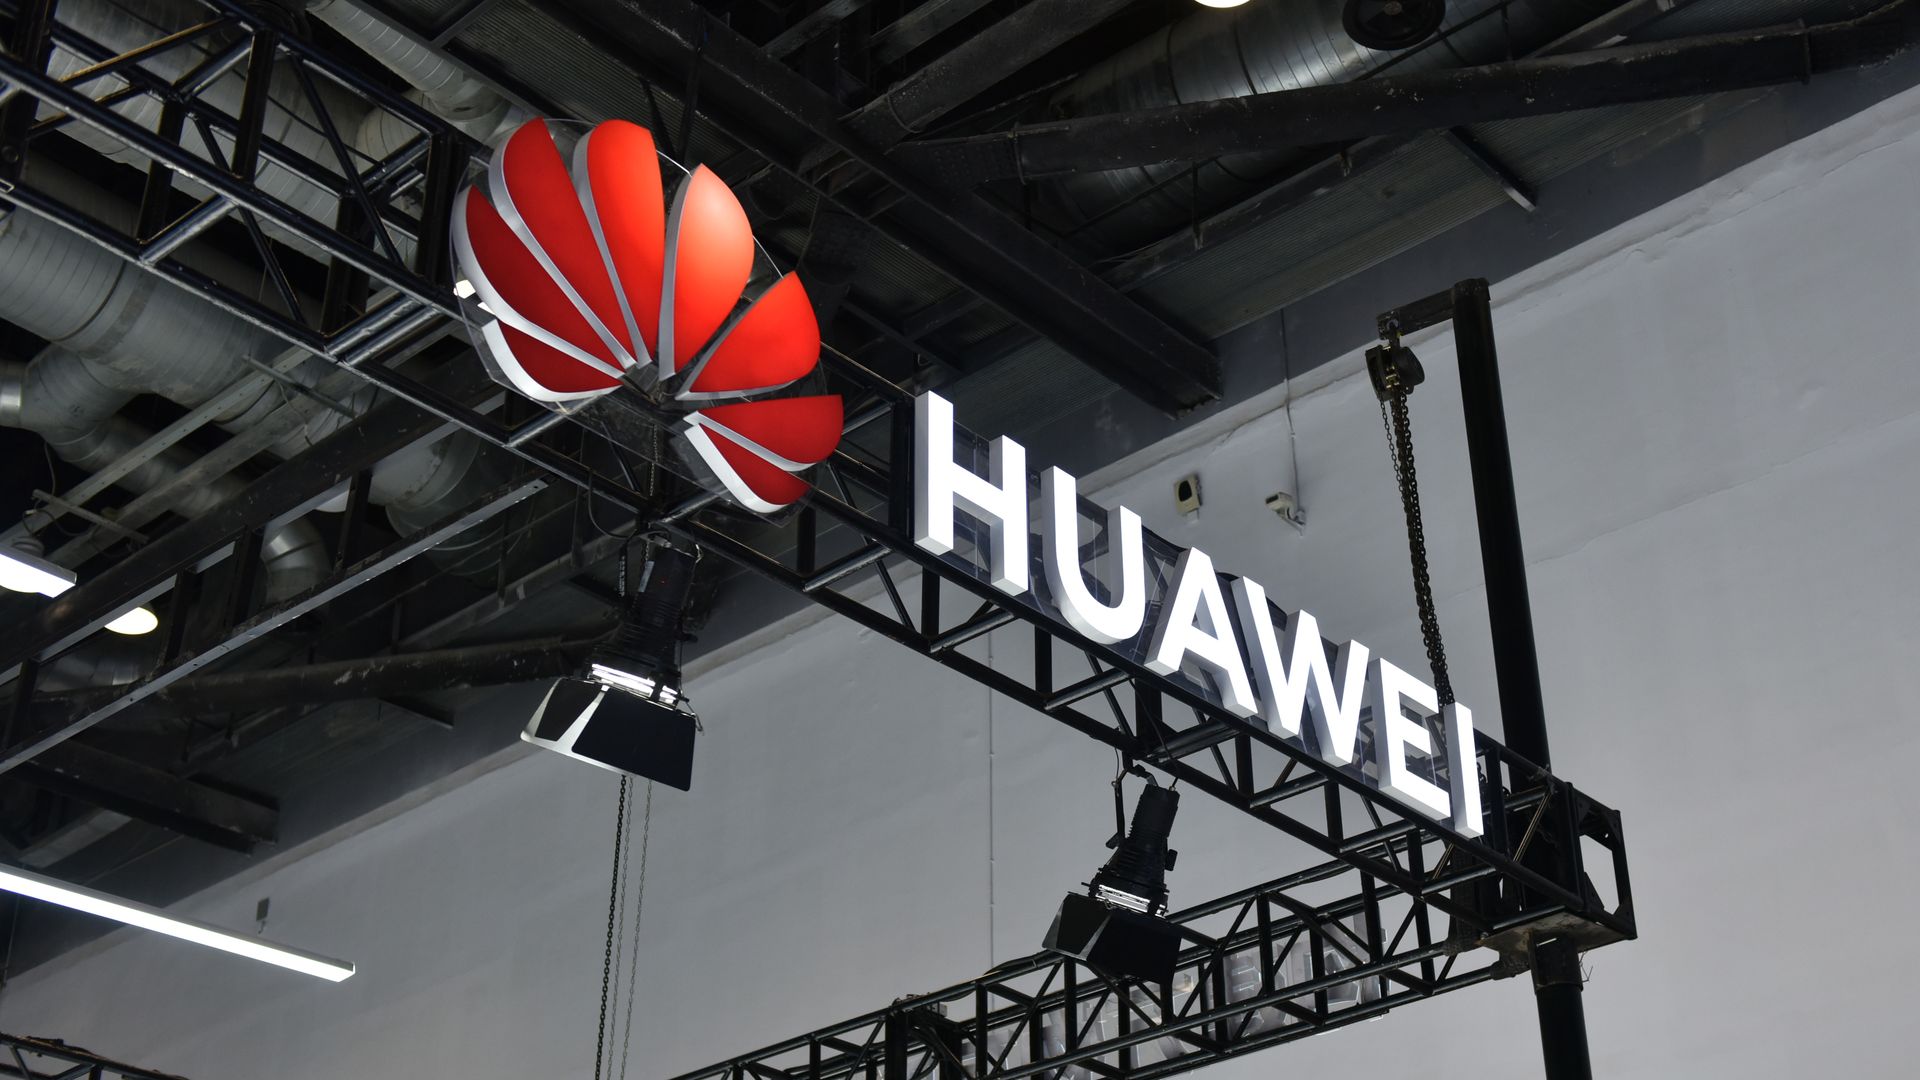 Photo of a large Huawei sign and its red logo